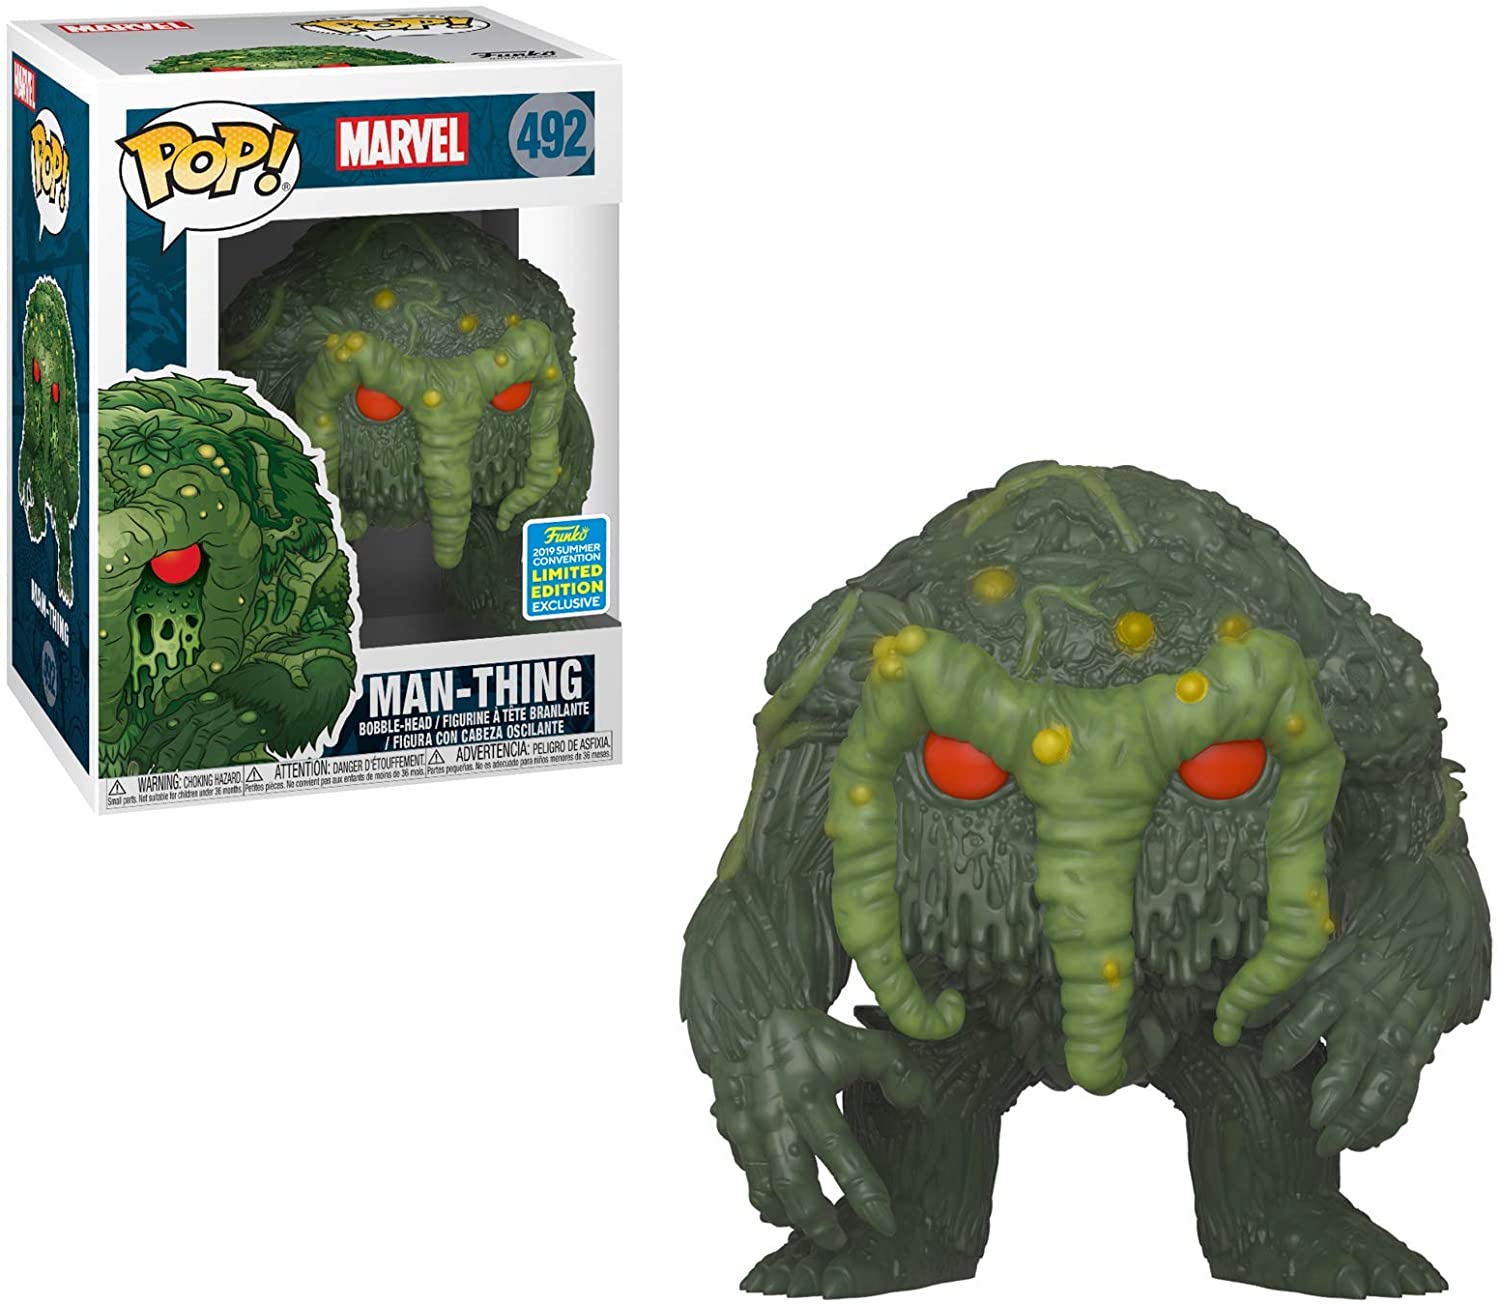 2019 Soft Cover Exclusive Man-Thing